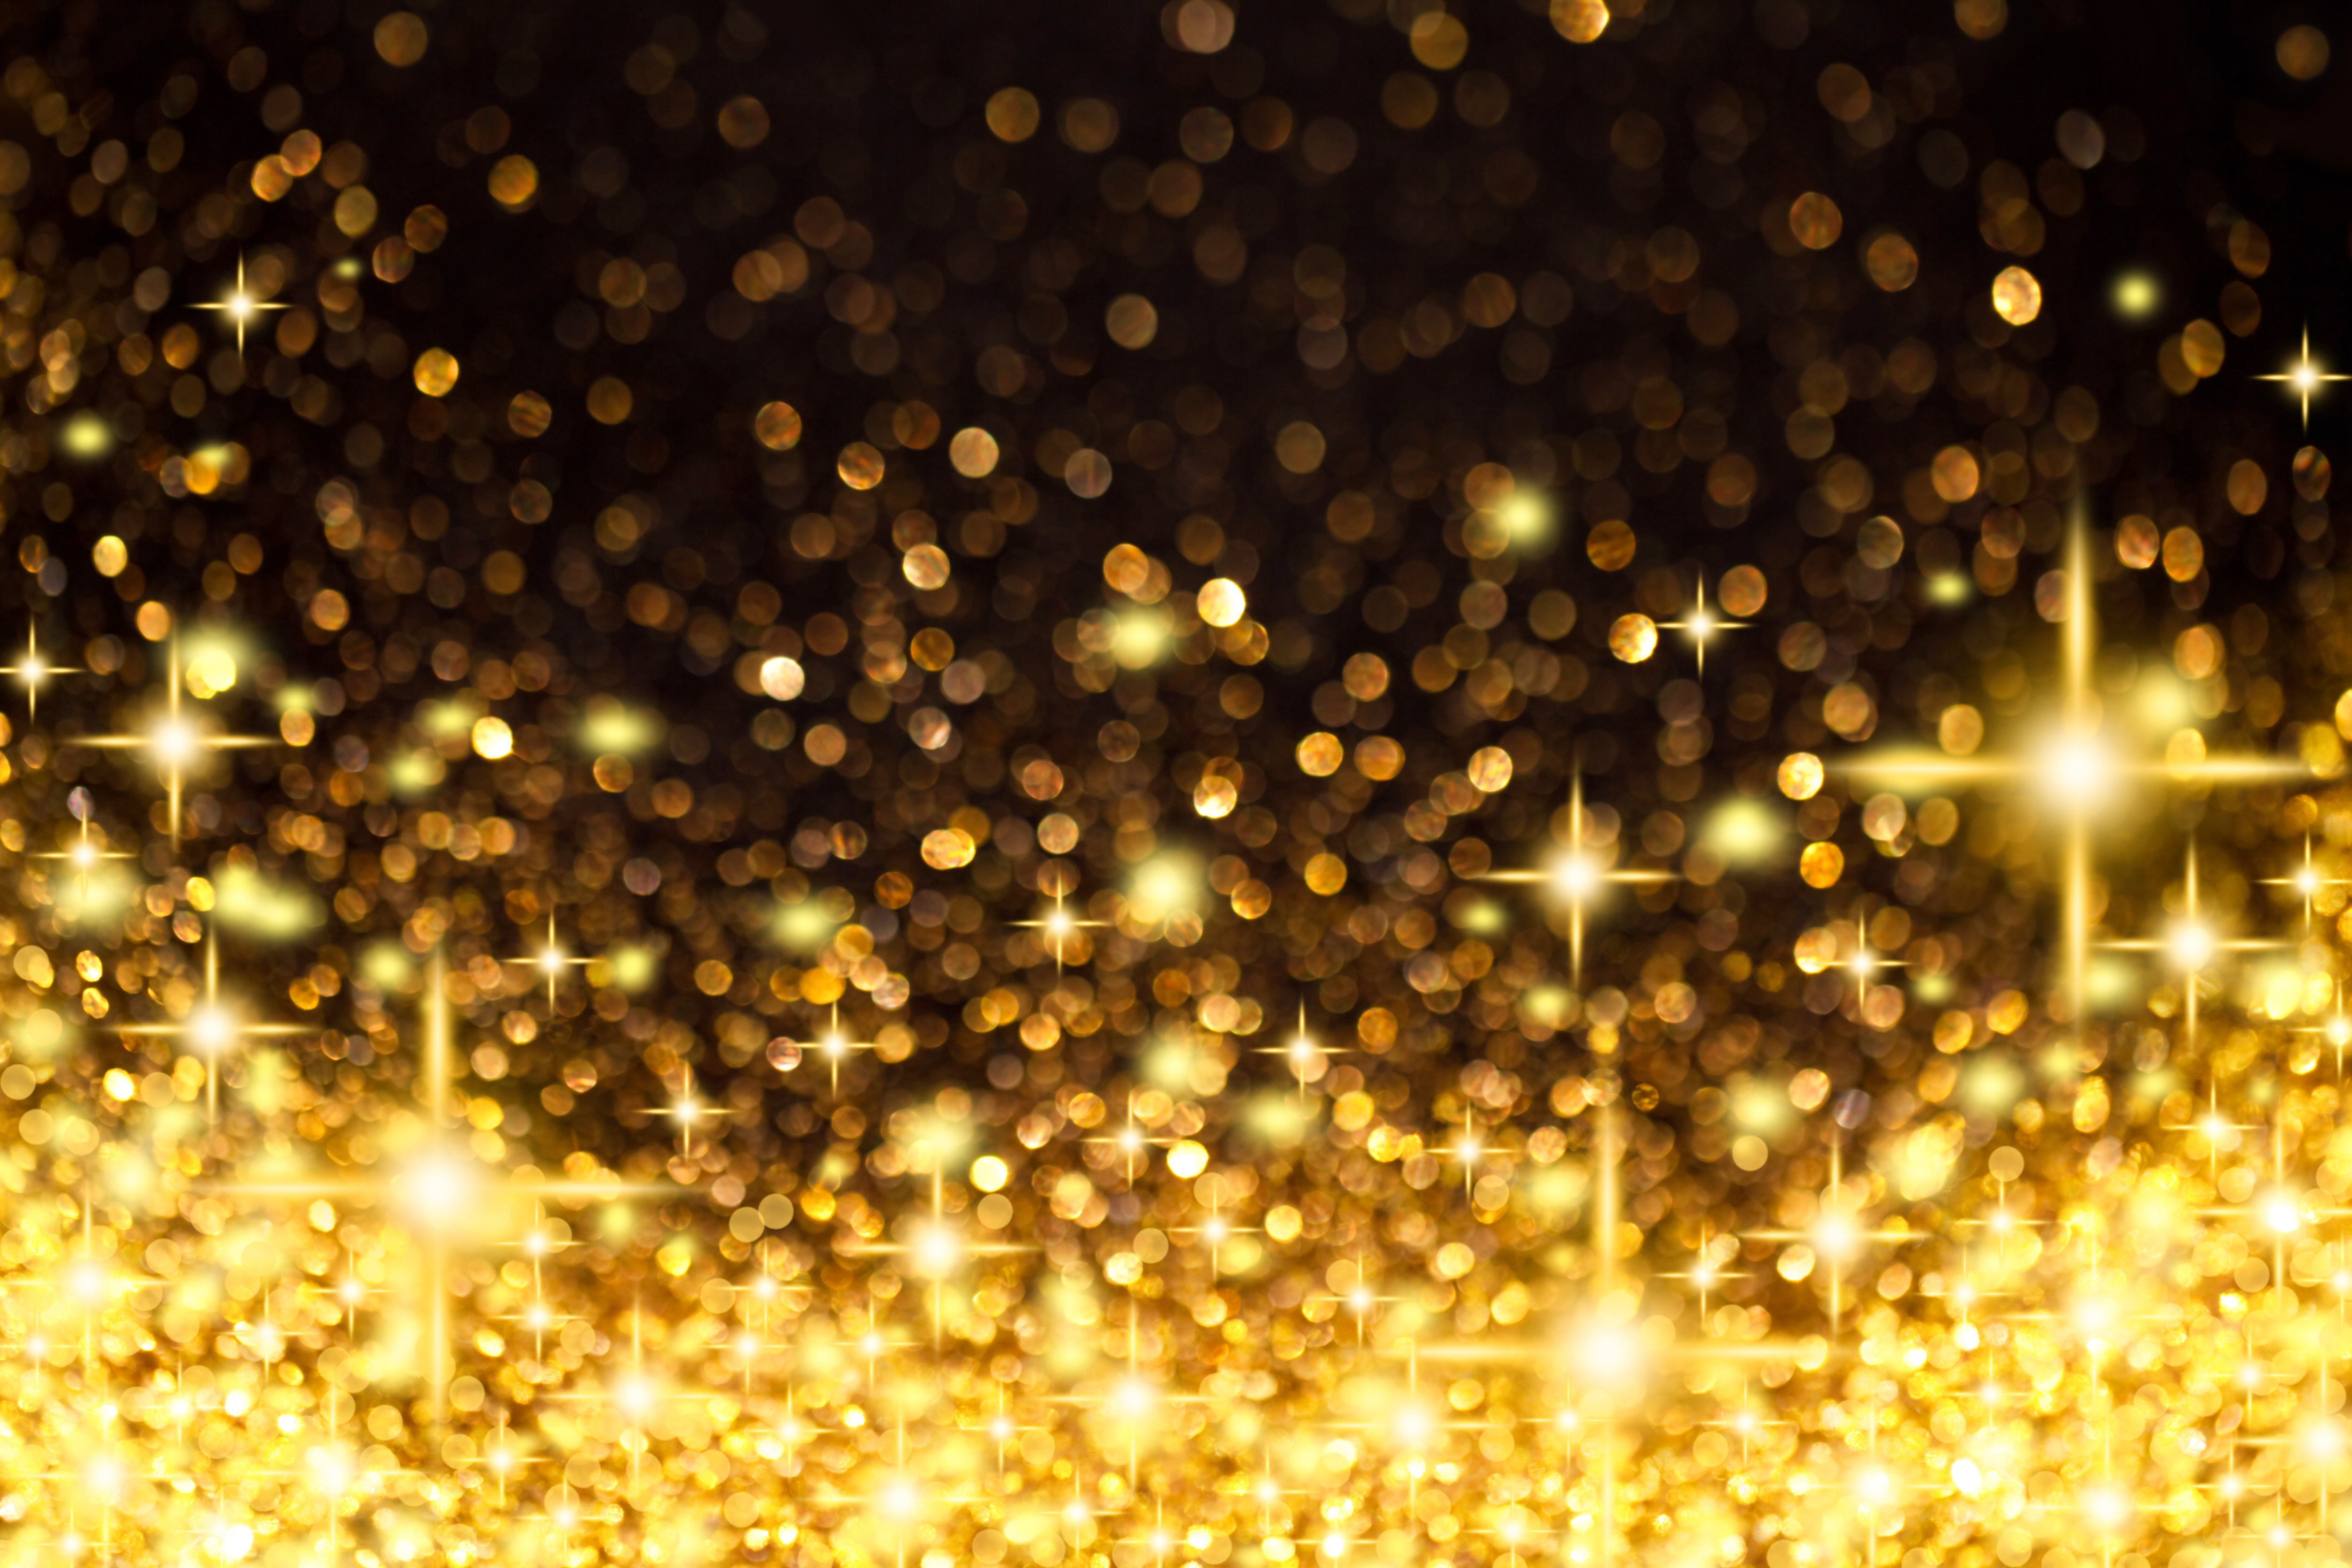 Gold Black Shining Deco Background | Gallery Yopriceville - High